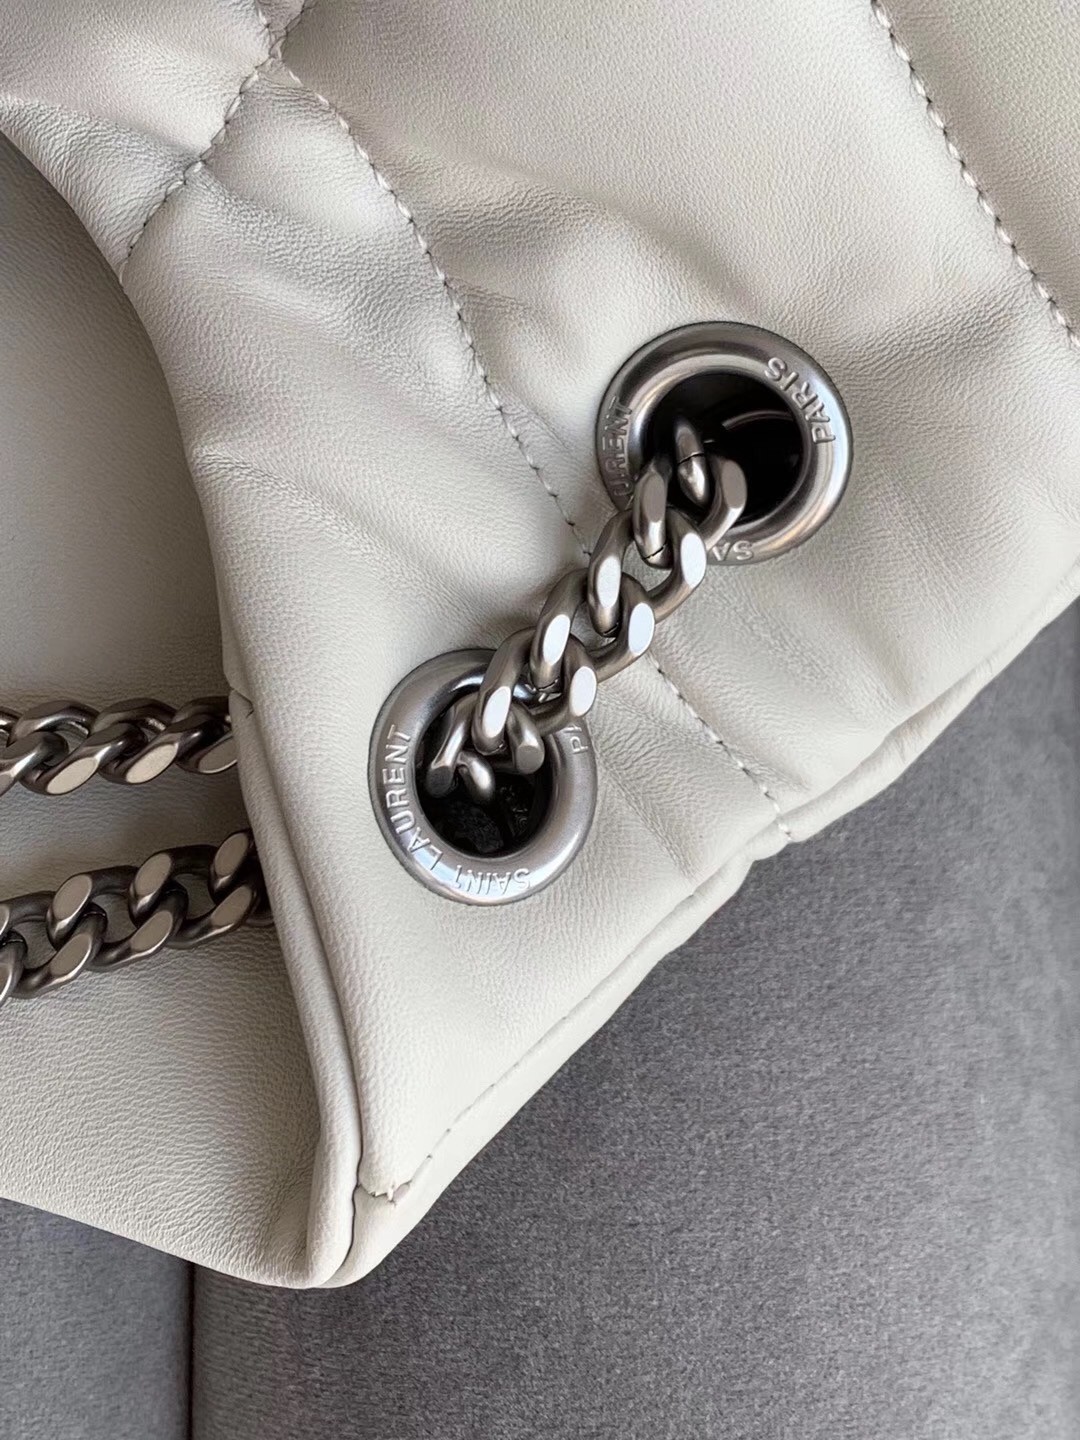 Saint Laurent Loulou Puffer Small Bag In White Lambskin 198